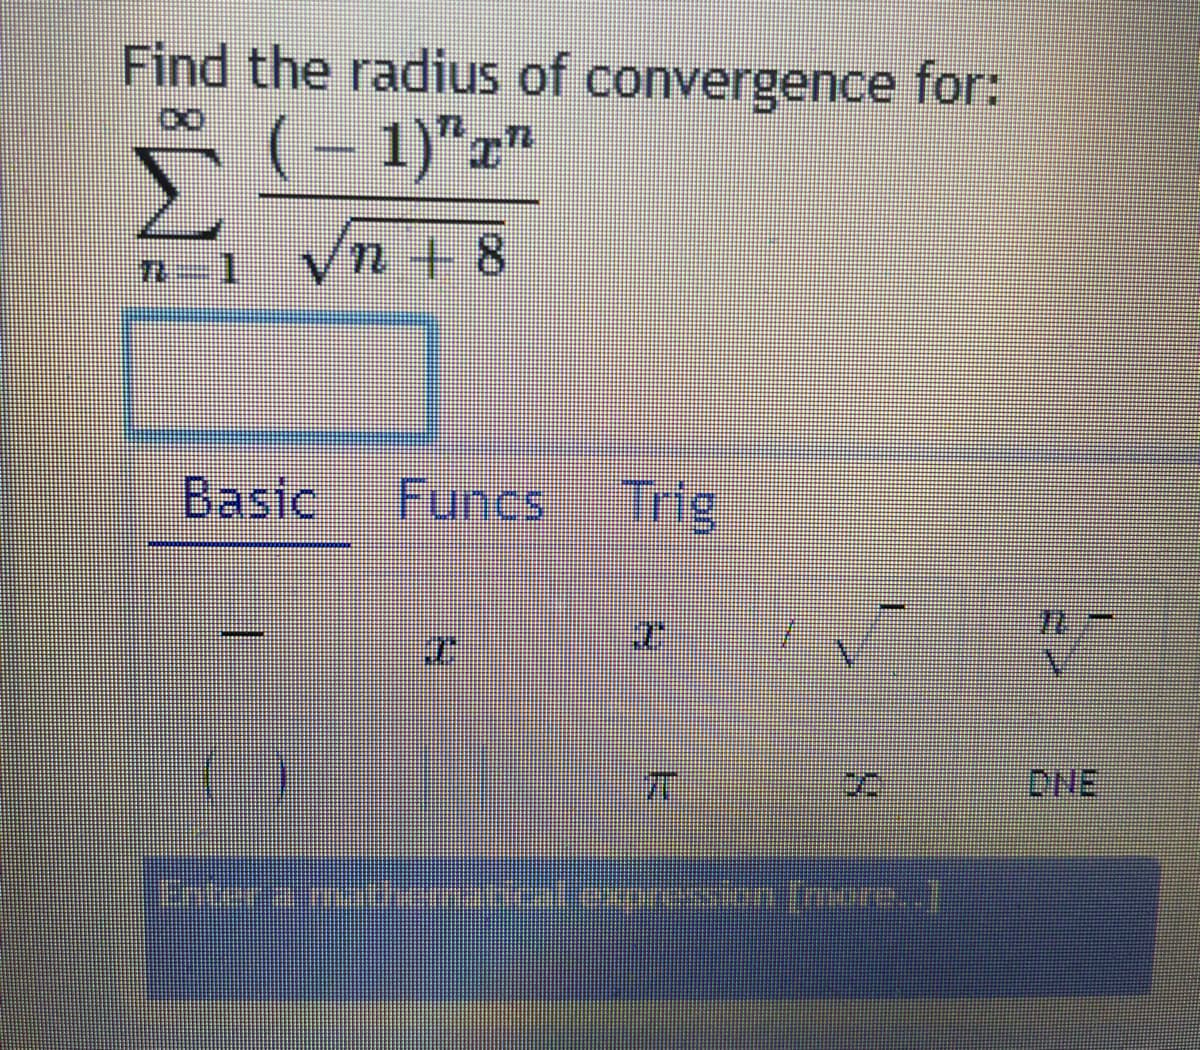 Find the radius of convergence for:
r(- 1)"x"
Vn + 8
Basic
Funcs Trig
DHE
Enter a material exression (more..]
2)
